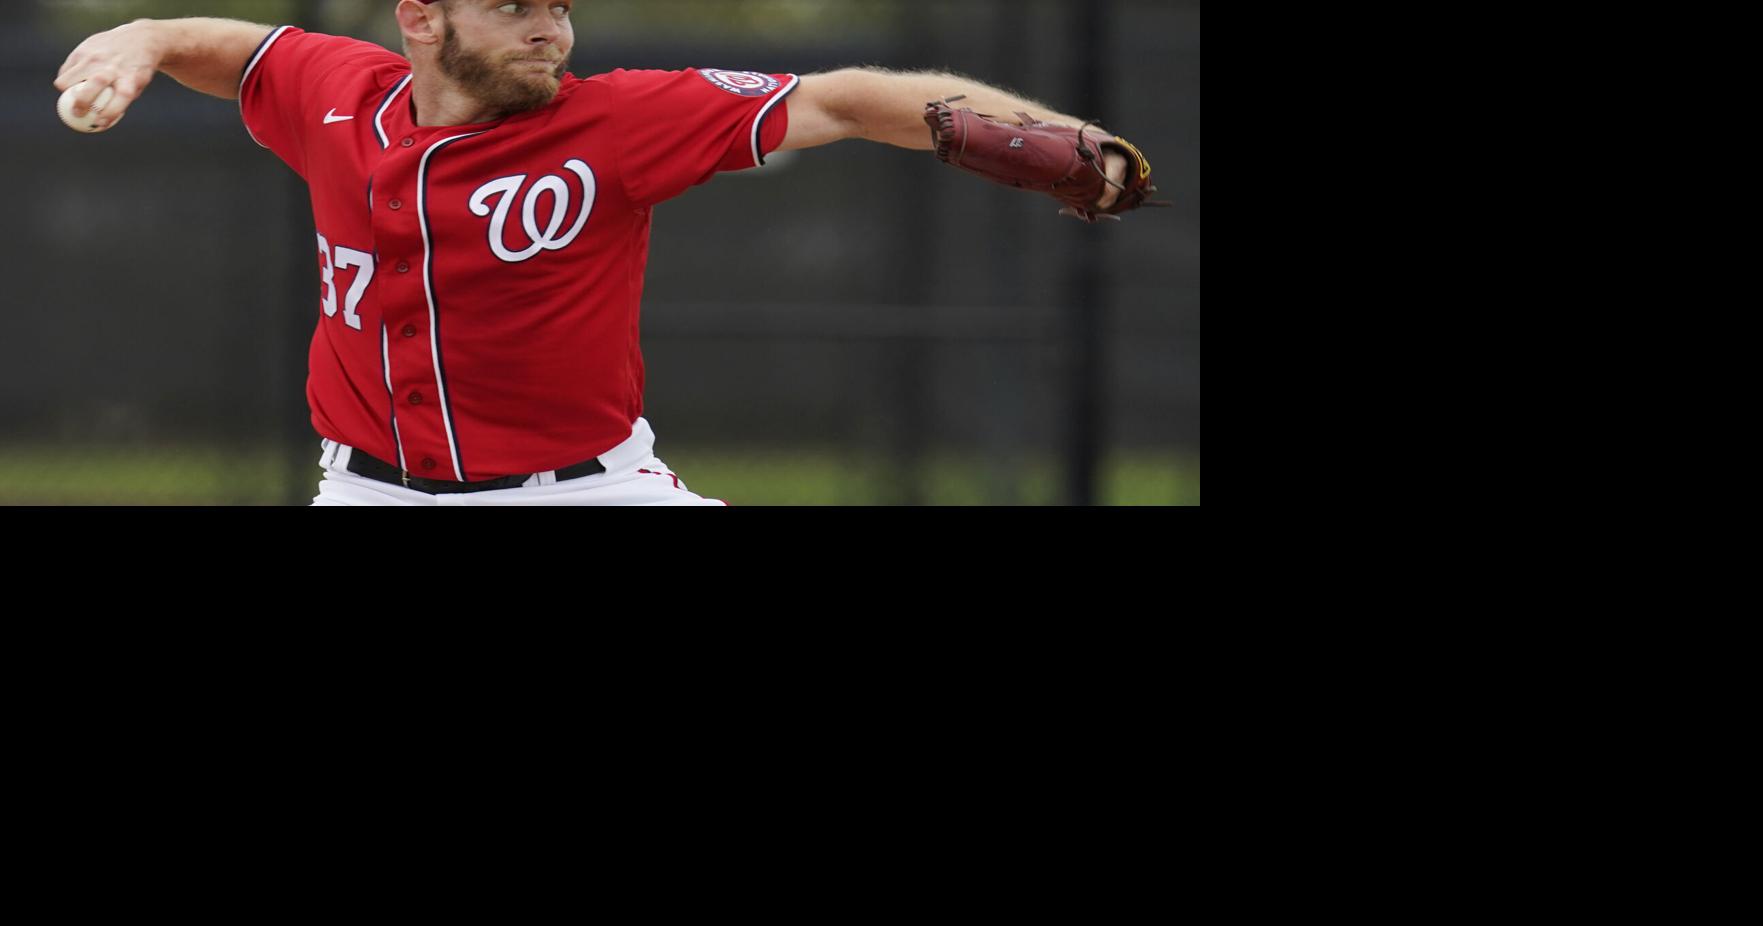 Strasburg, Nats not pushing for a fast return as he recovers